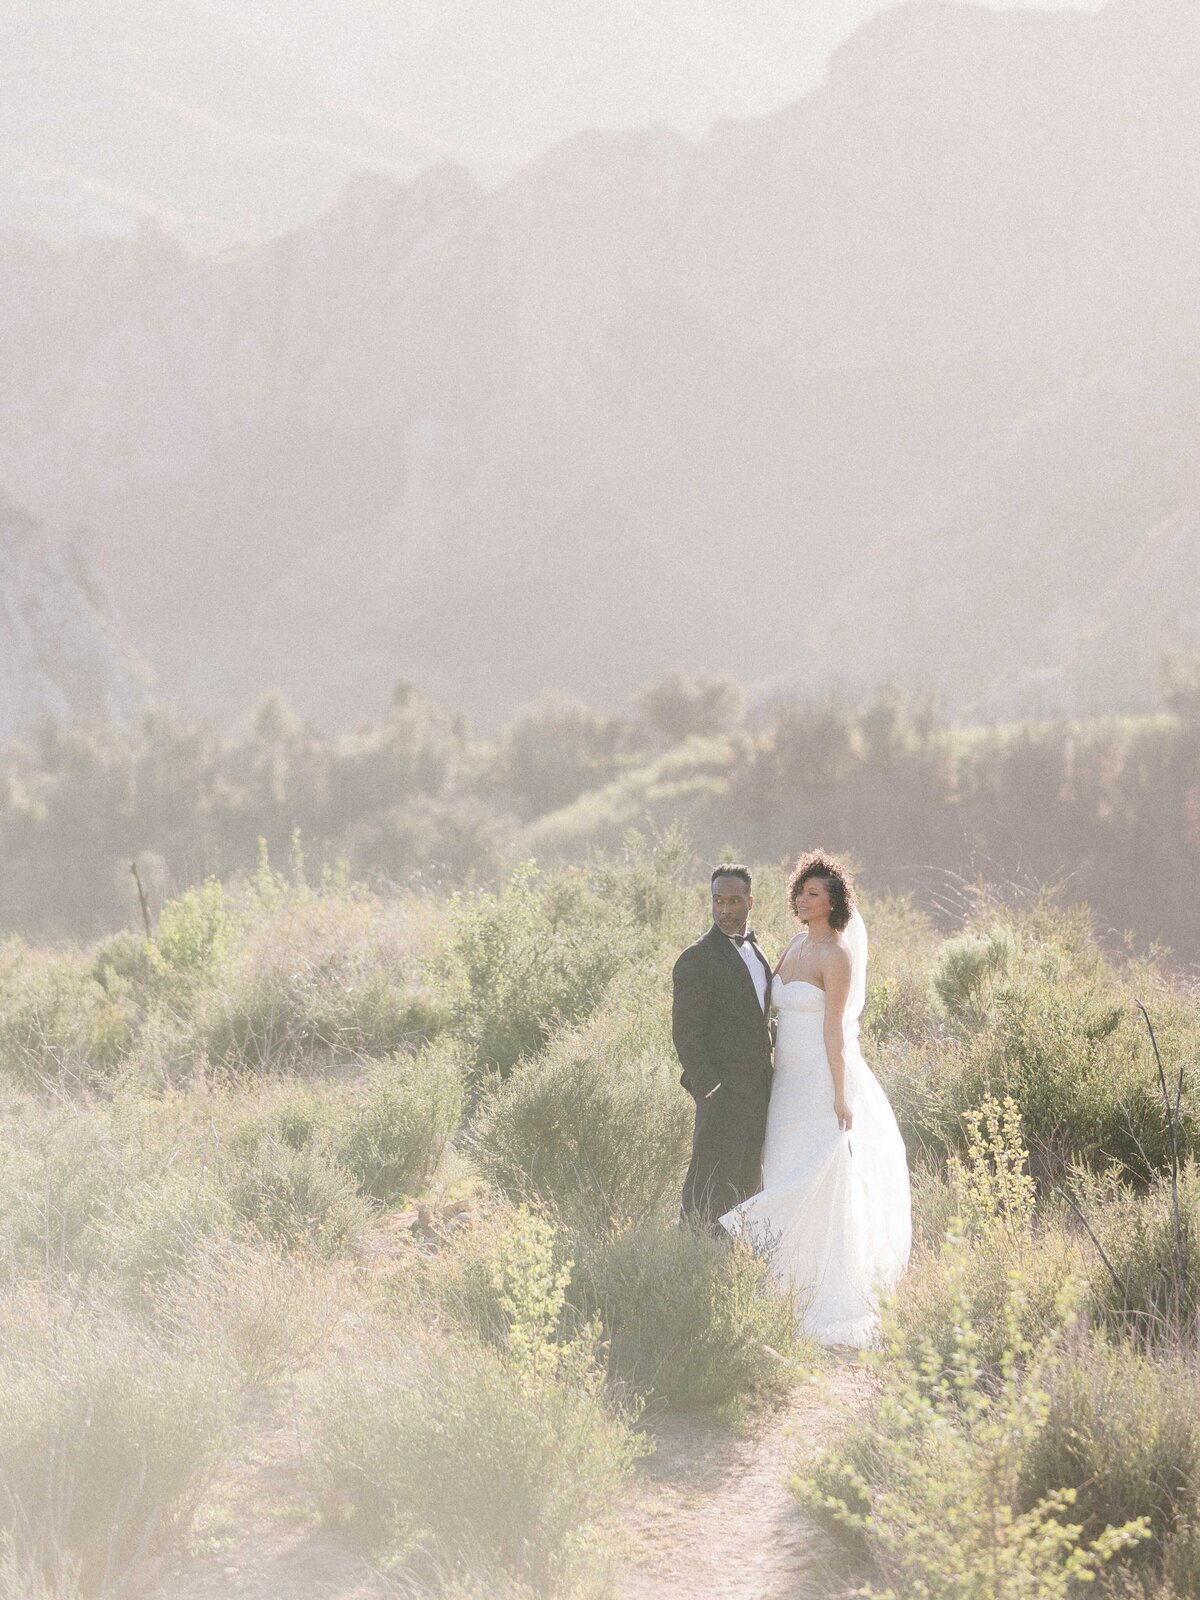 Bride and groom in mountains portrait